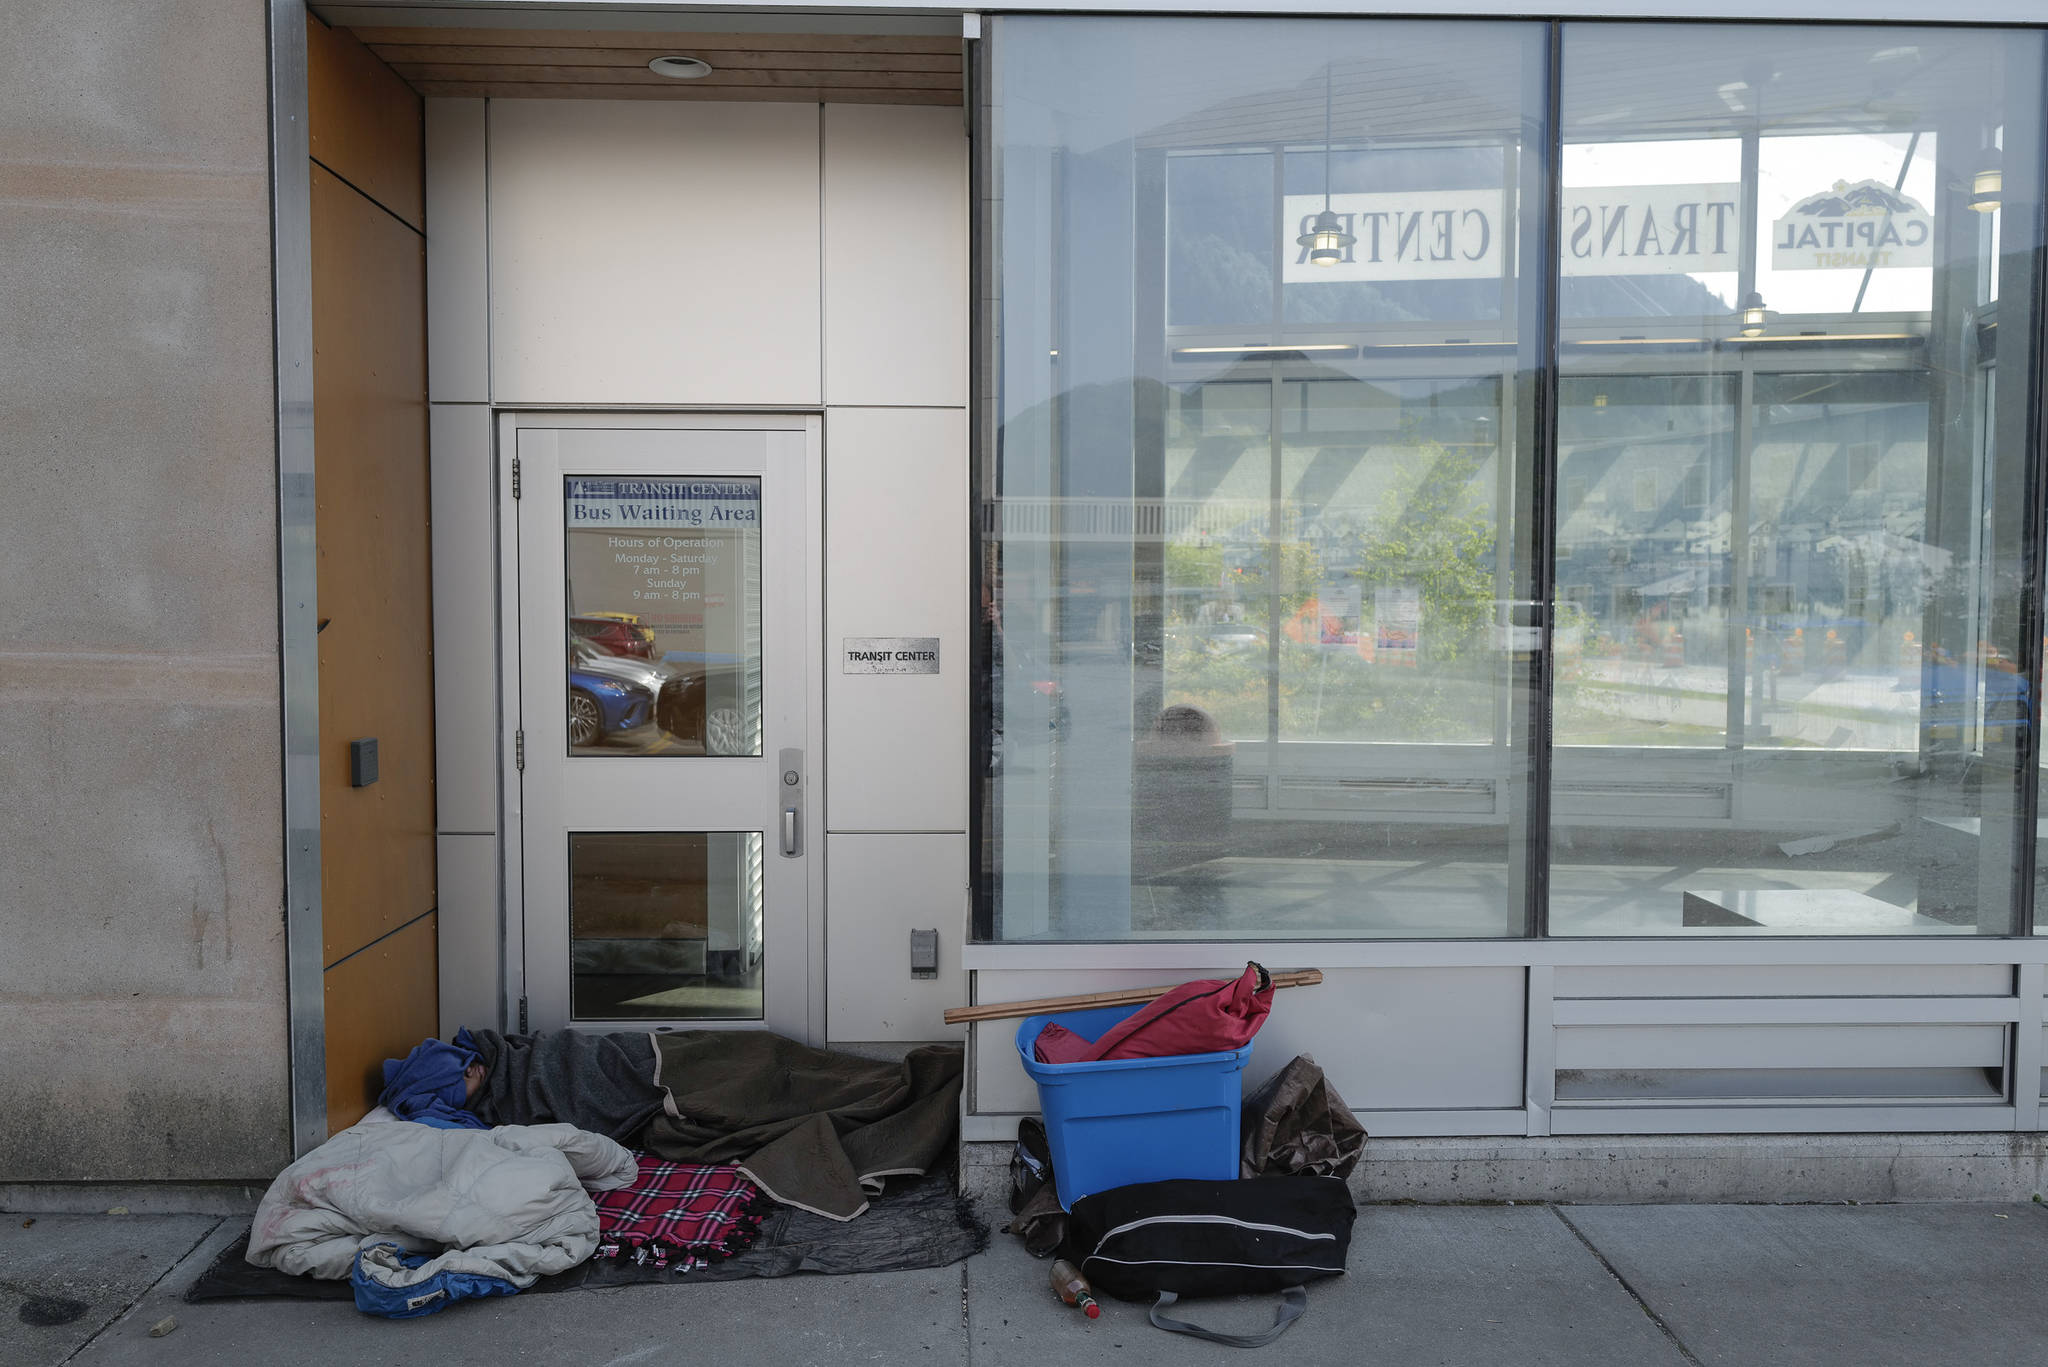 A homeless person sleeps in the doorway at the Capital Transit Center on Tuesday, Aug. 13, 2019. (Michael Penn | Juneau Empire)